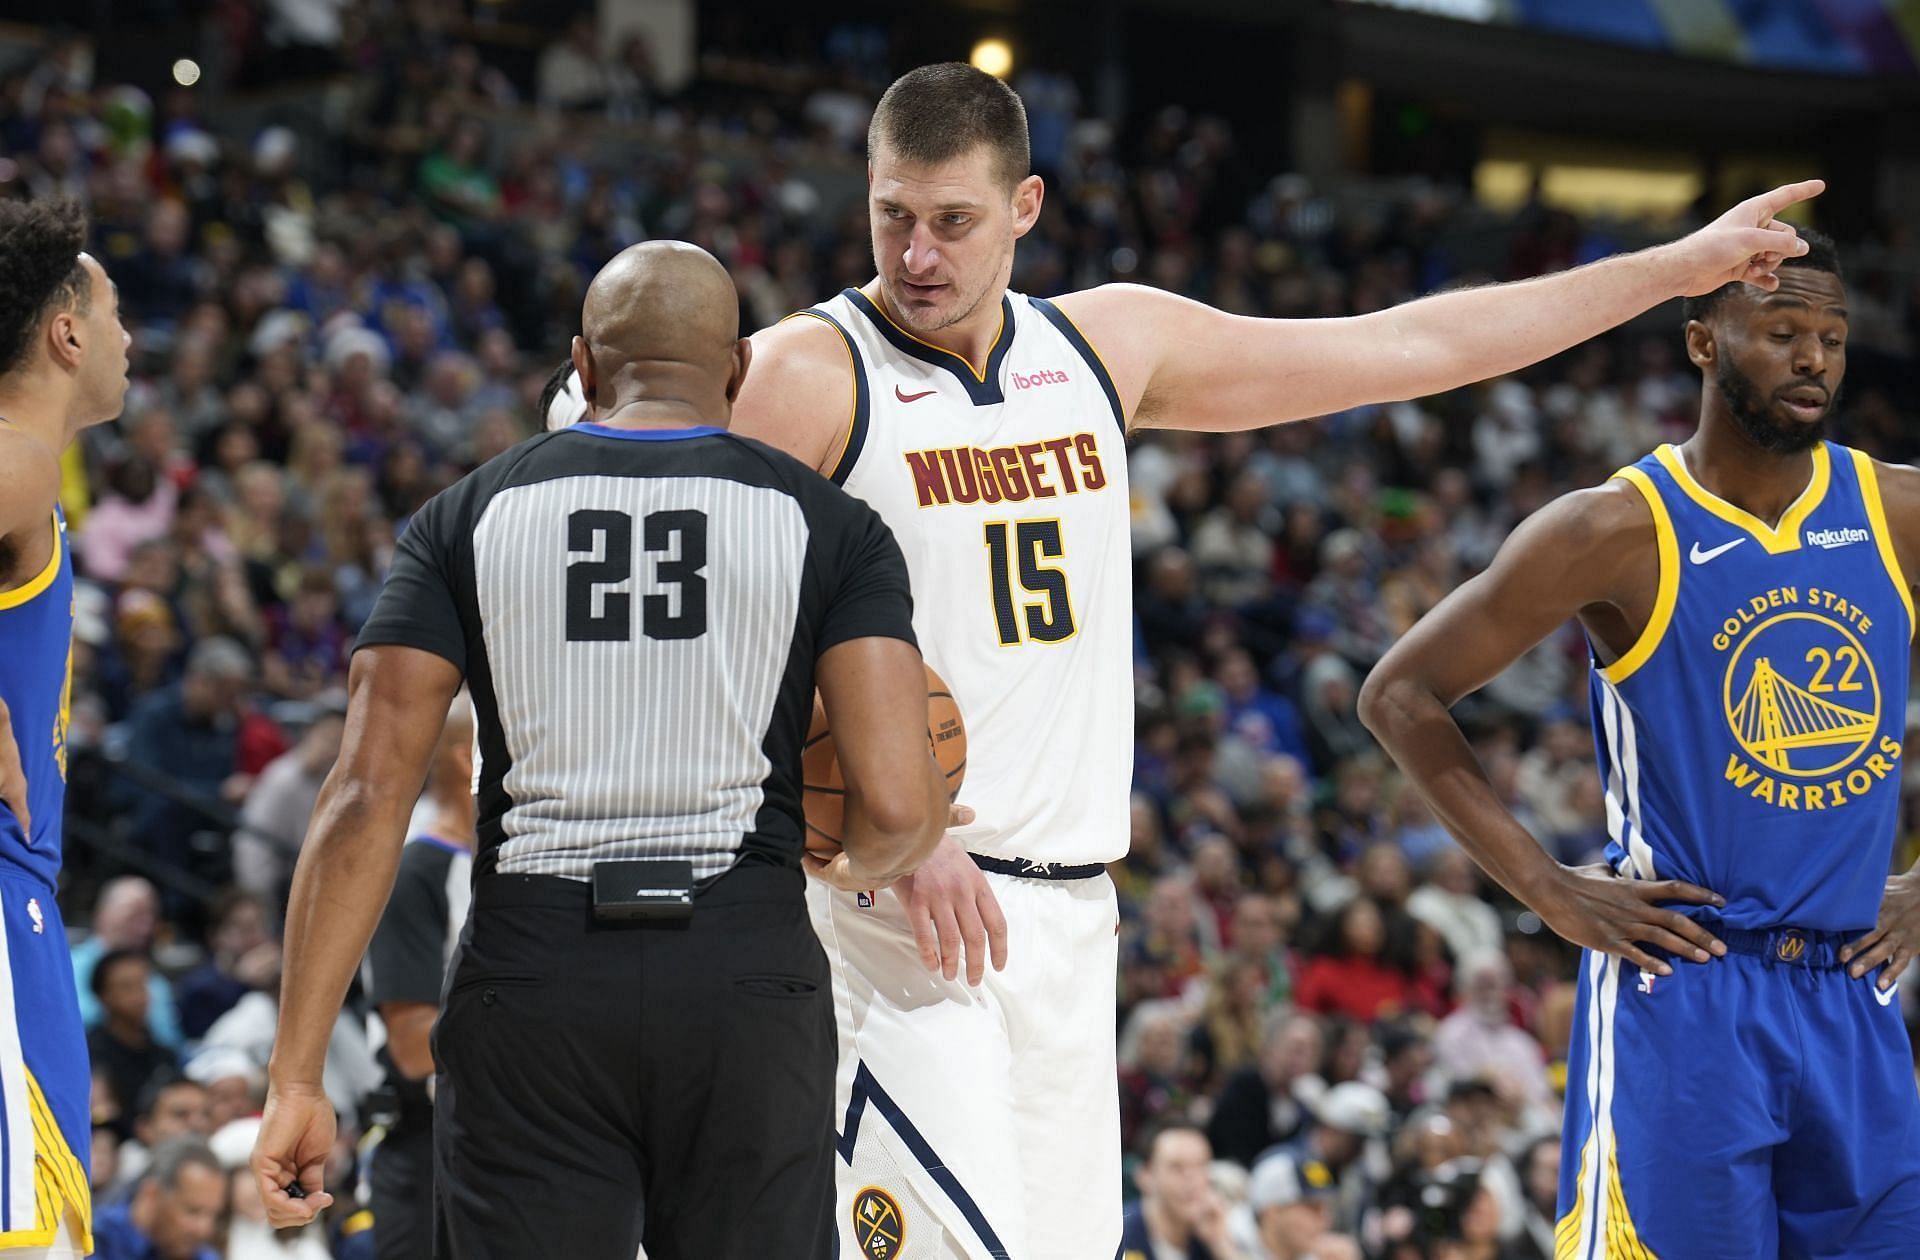 Fans compare Nikola Jokic to Joel Embiid after making 18 free throws against the Warriors